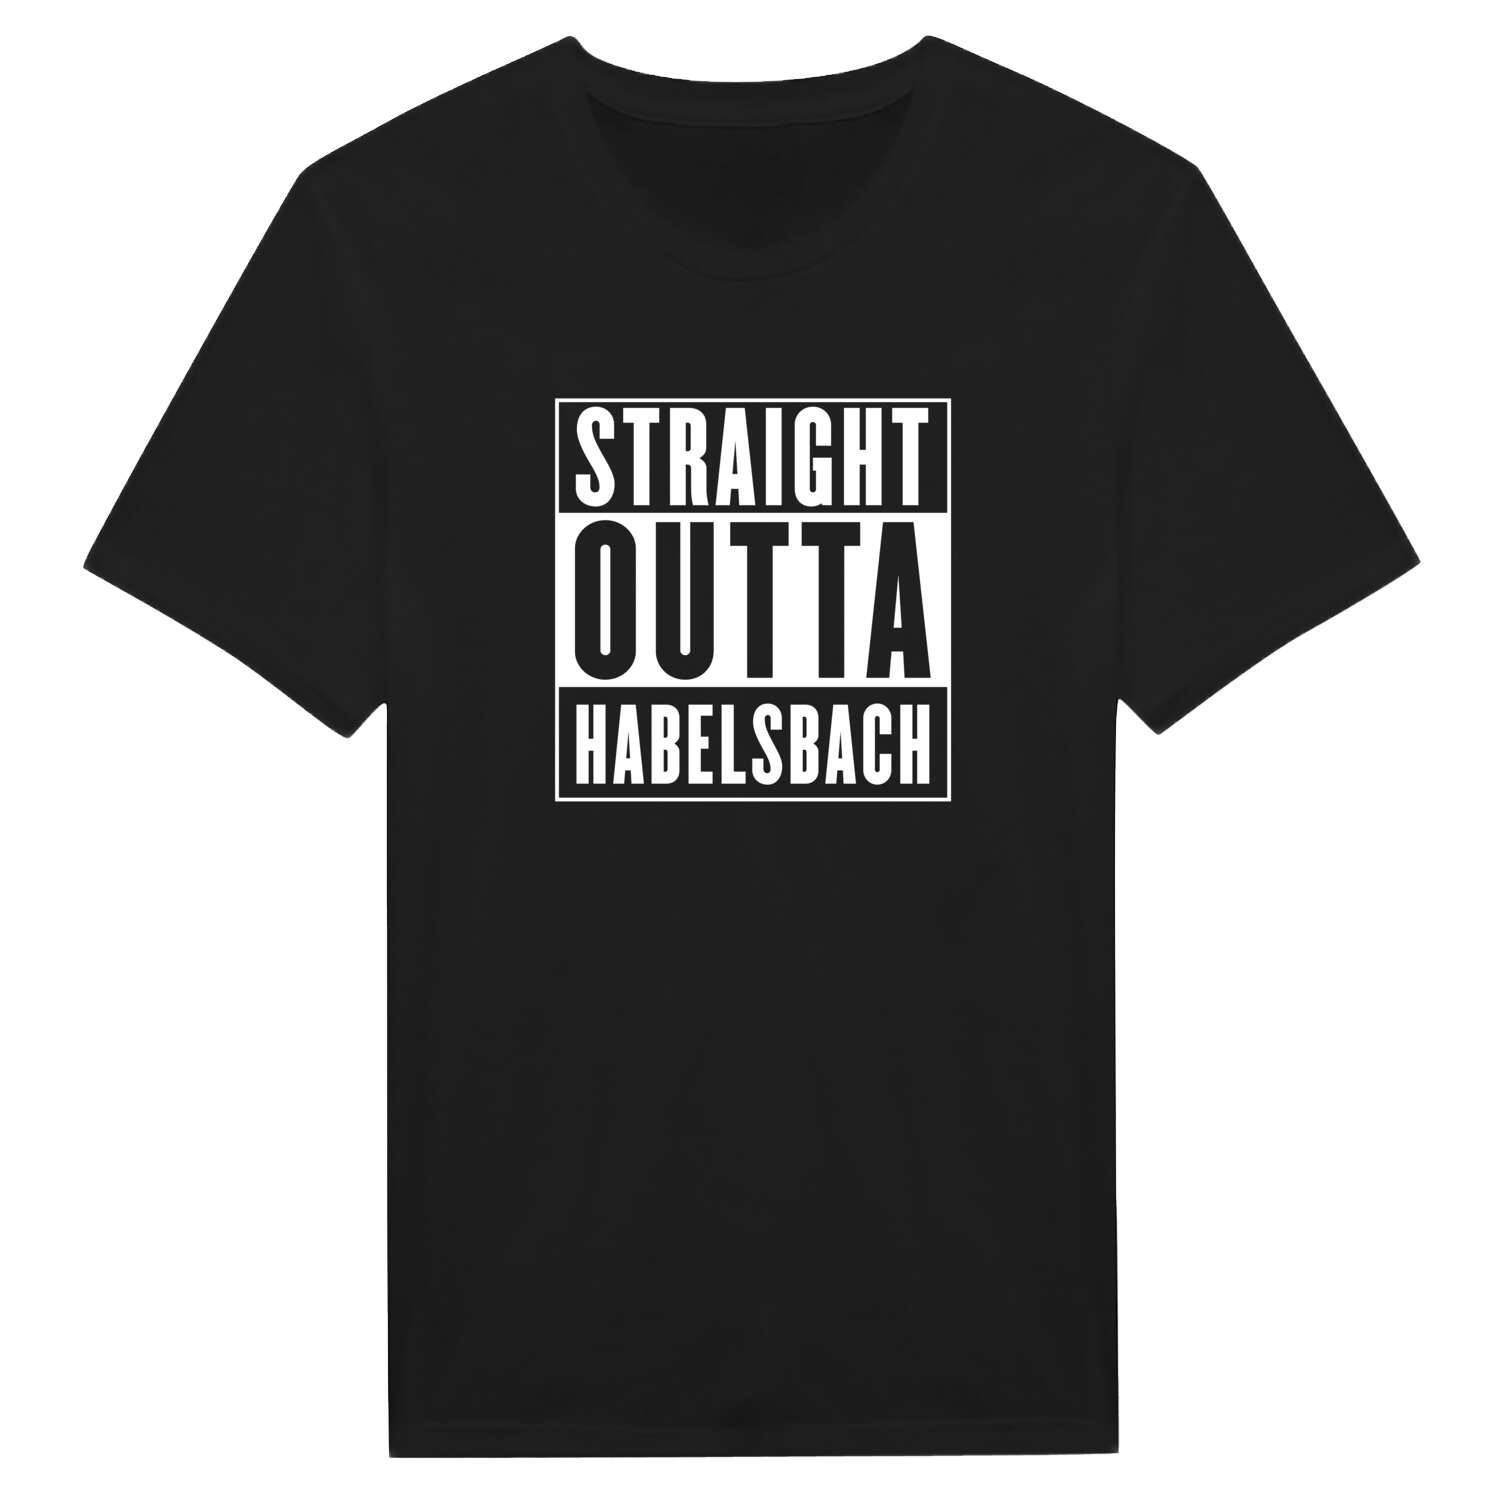 Habelsbach T-Shirt »Straight Outta«